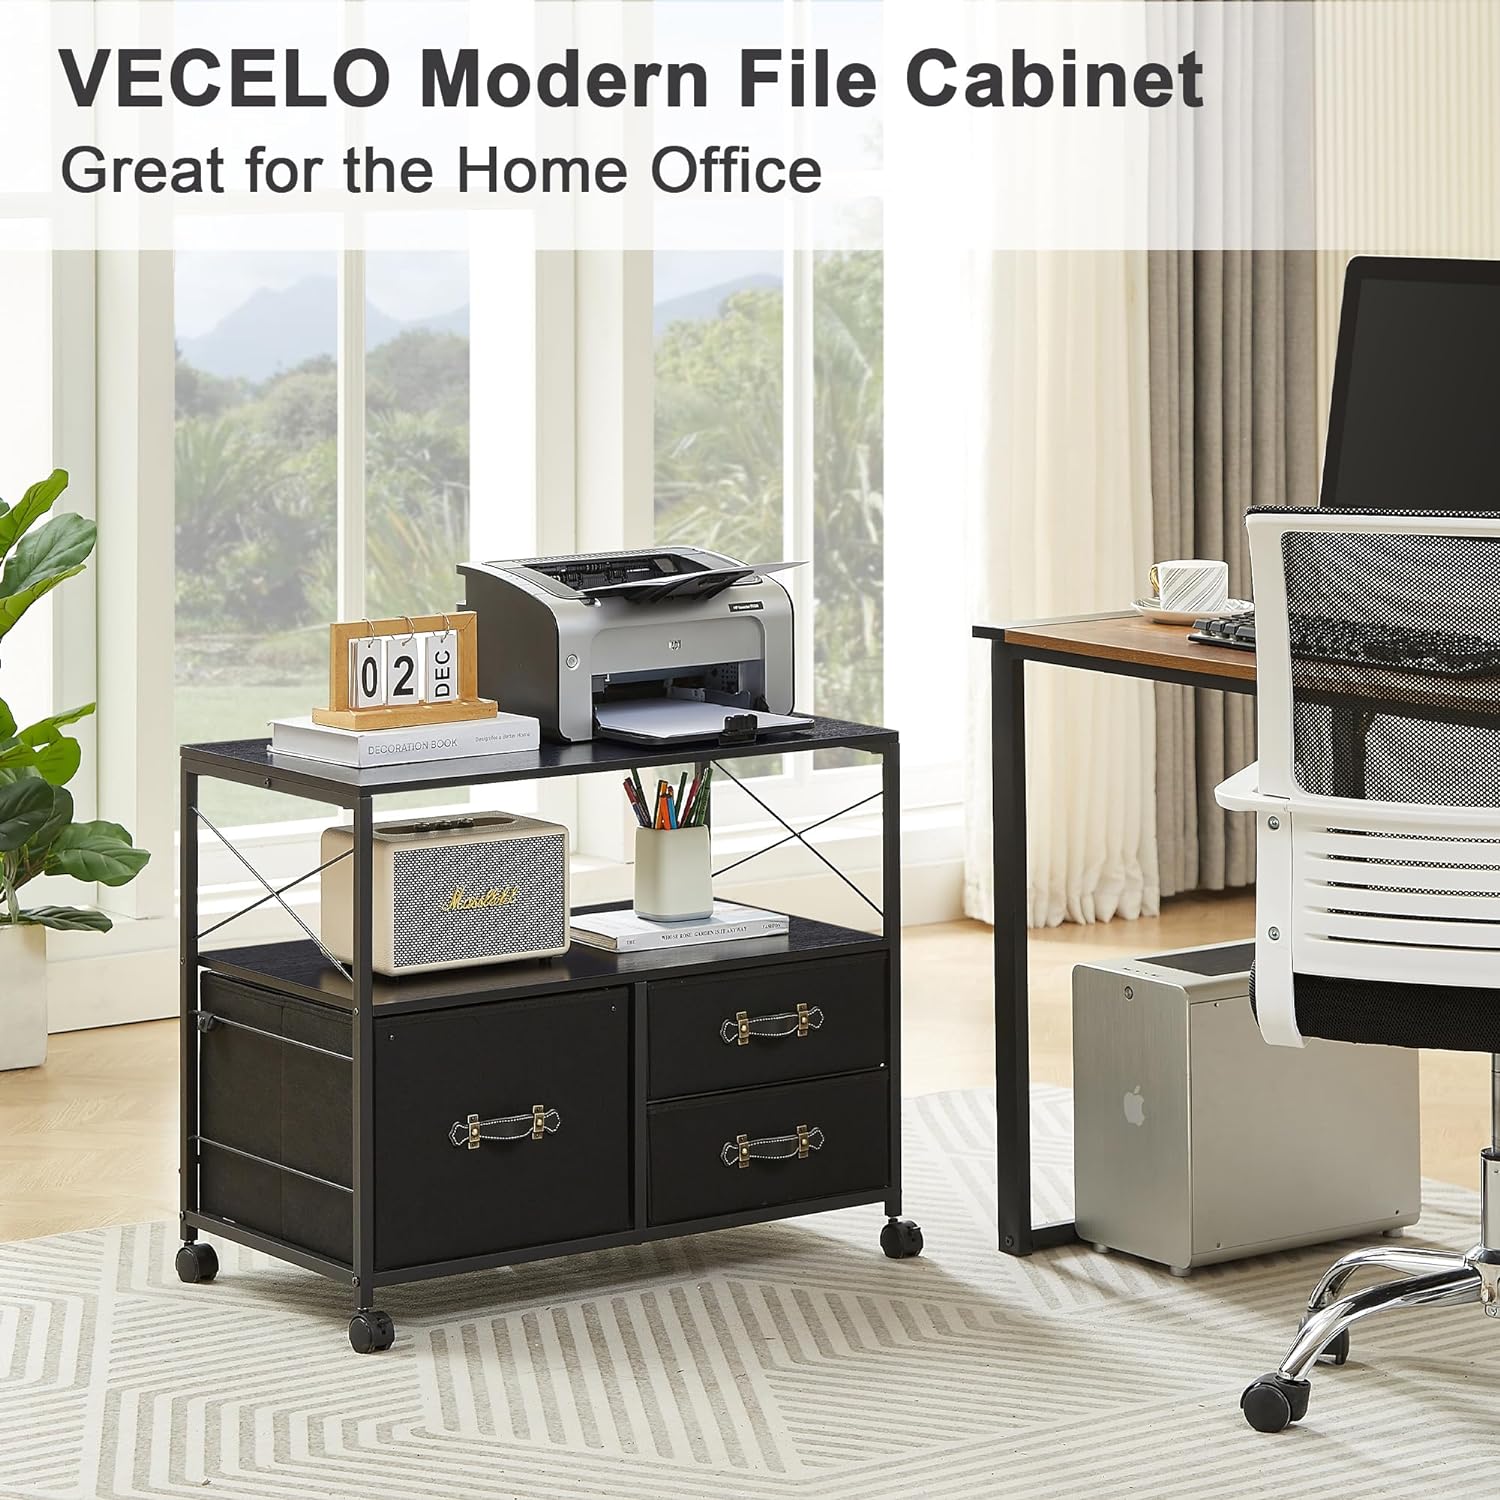 VECELO 3 Drawer Lateral File Cabinet, Rolling Printer Stand with Open Storage Shelf